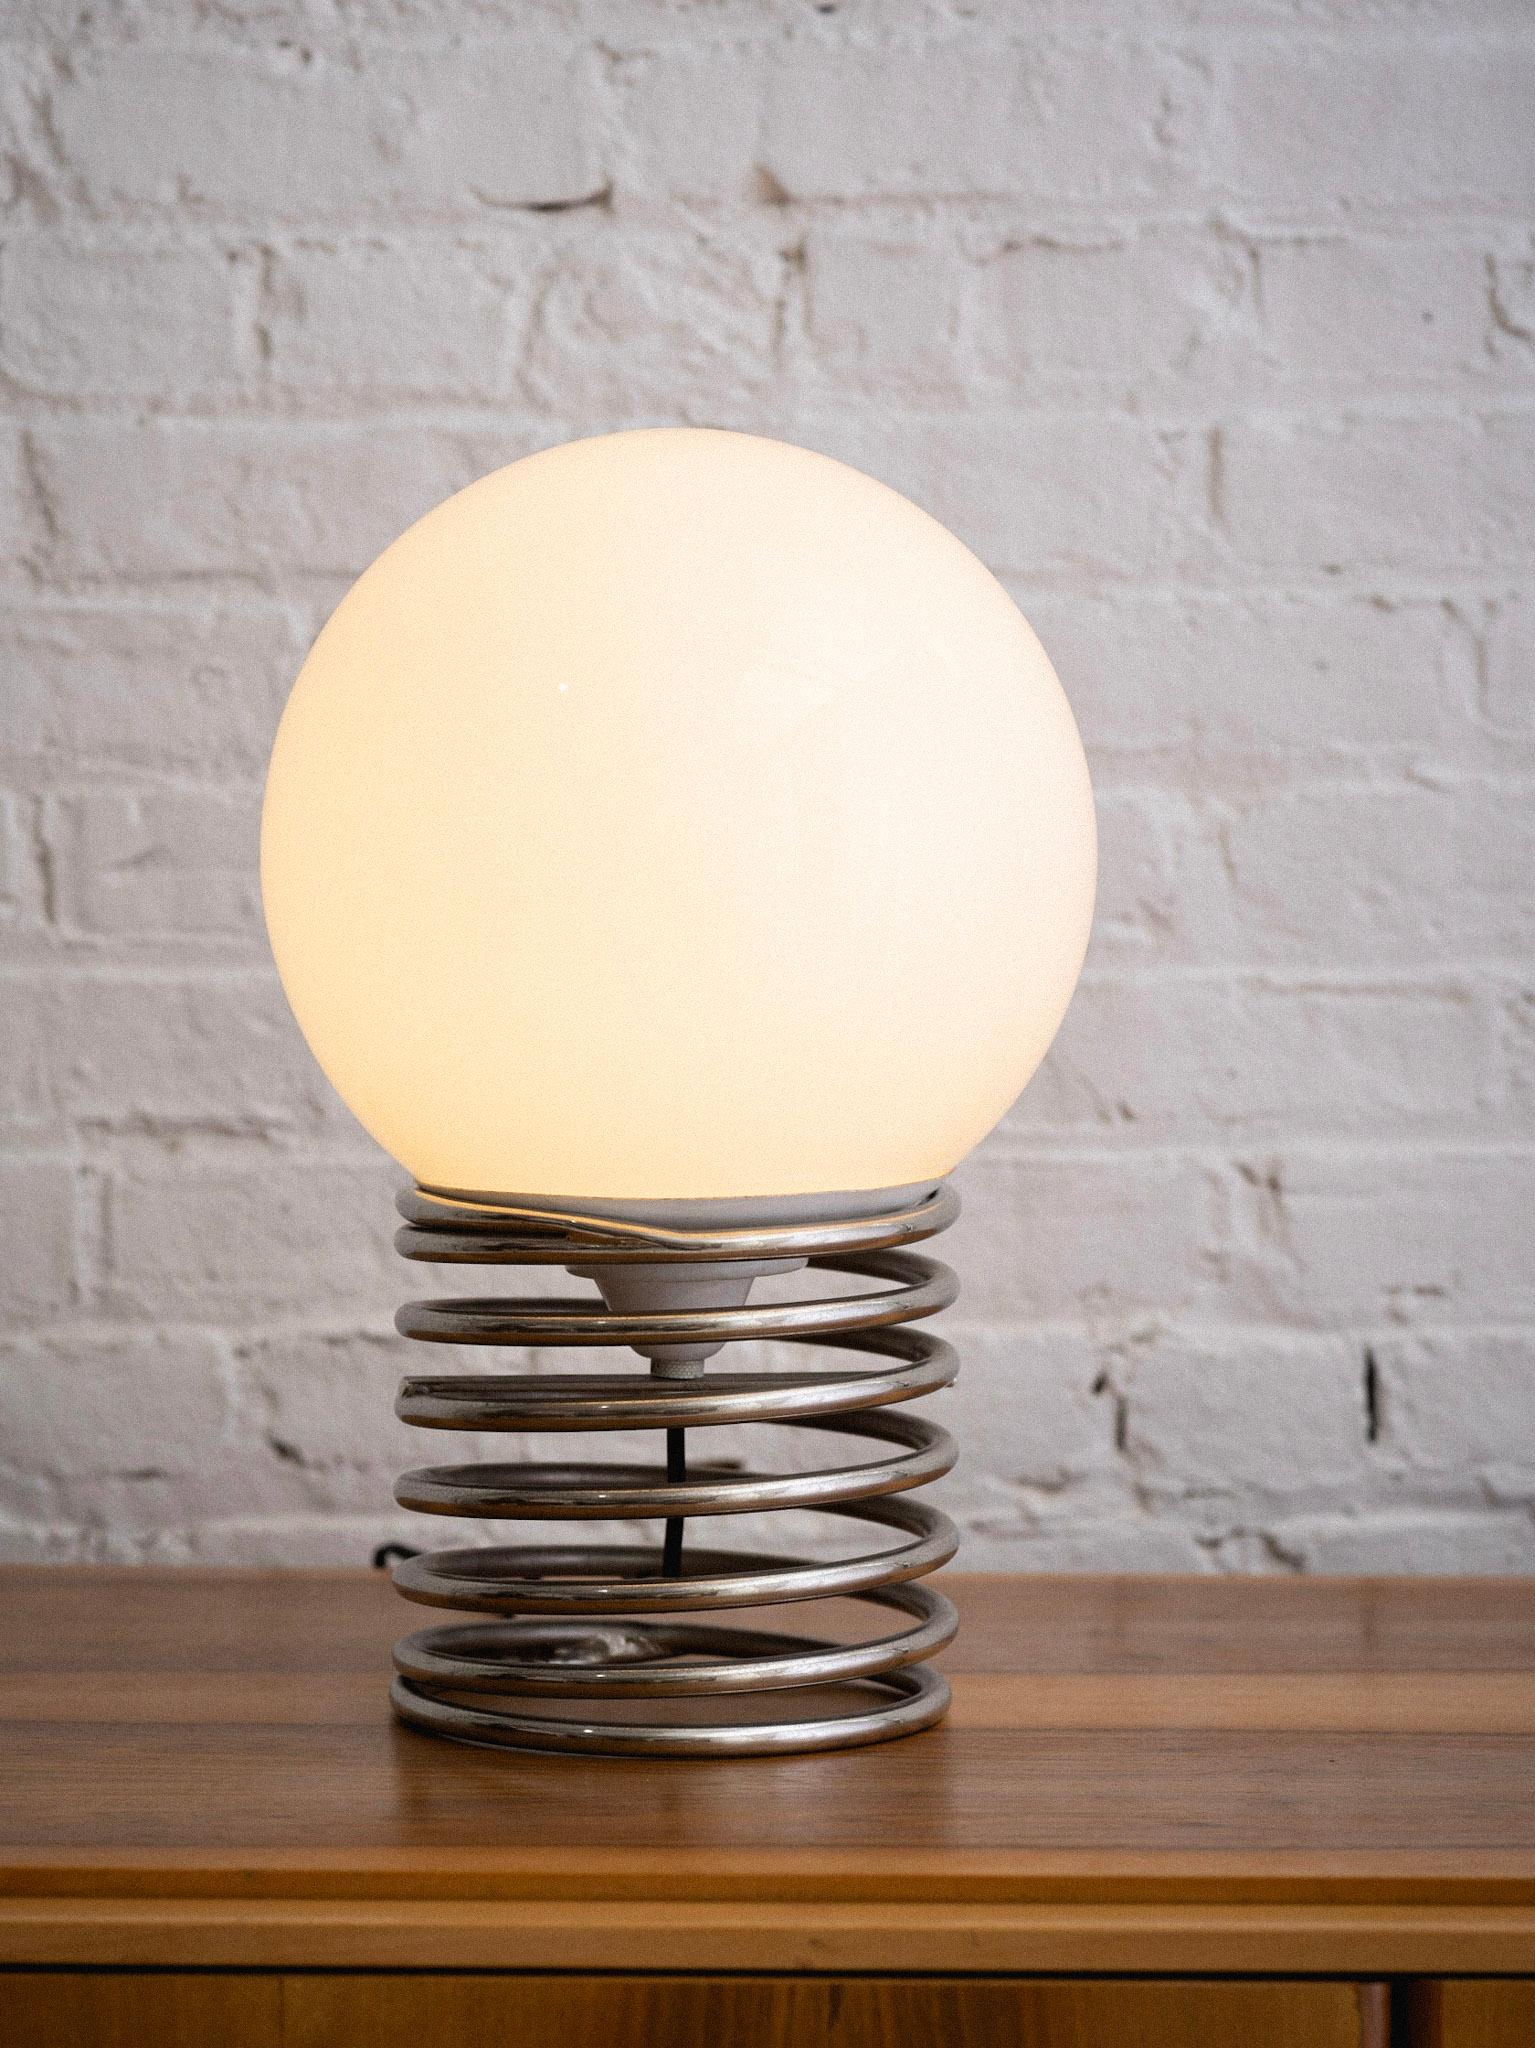 Italian Midcentury Chrome Spring Lamp In Good Condition For Sale In Brooklyn, NY